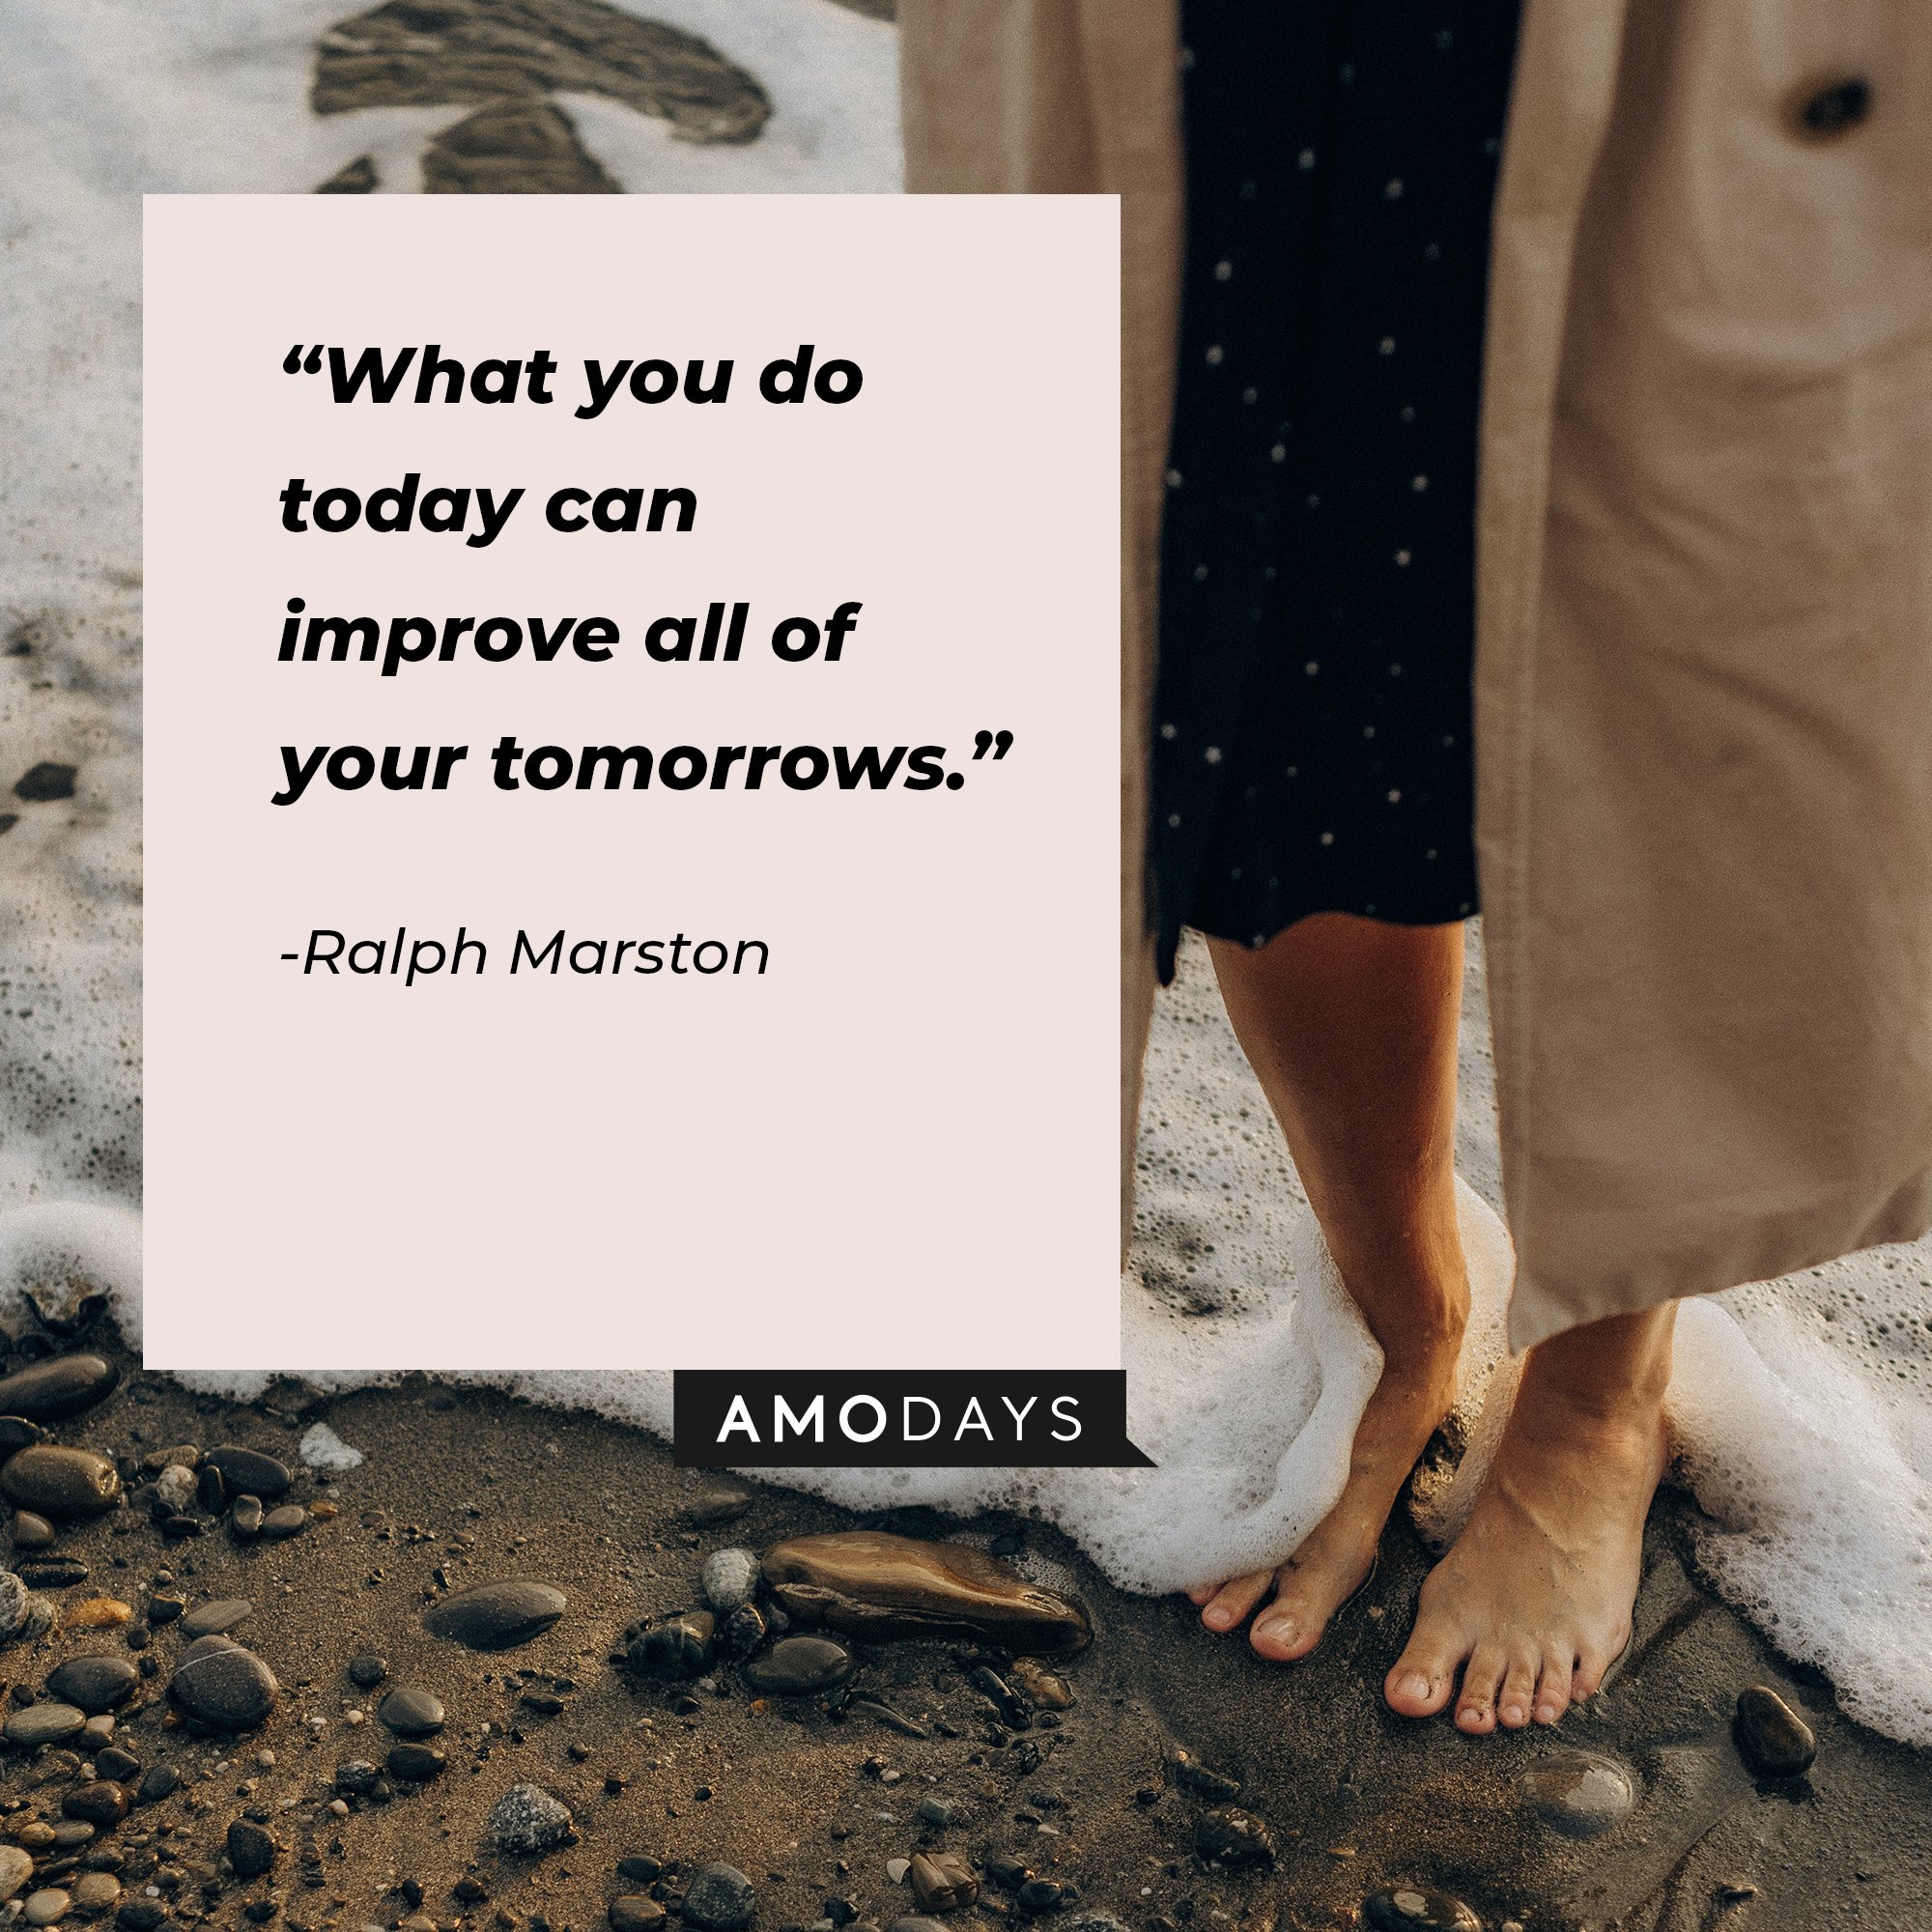 Ralph Marston's quote: "What you do today can improve all of your tomorrows.”  | Image: AmoDays